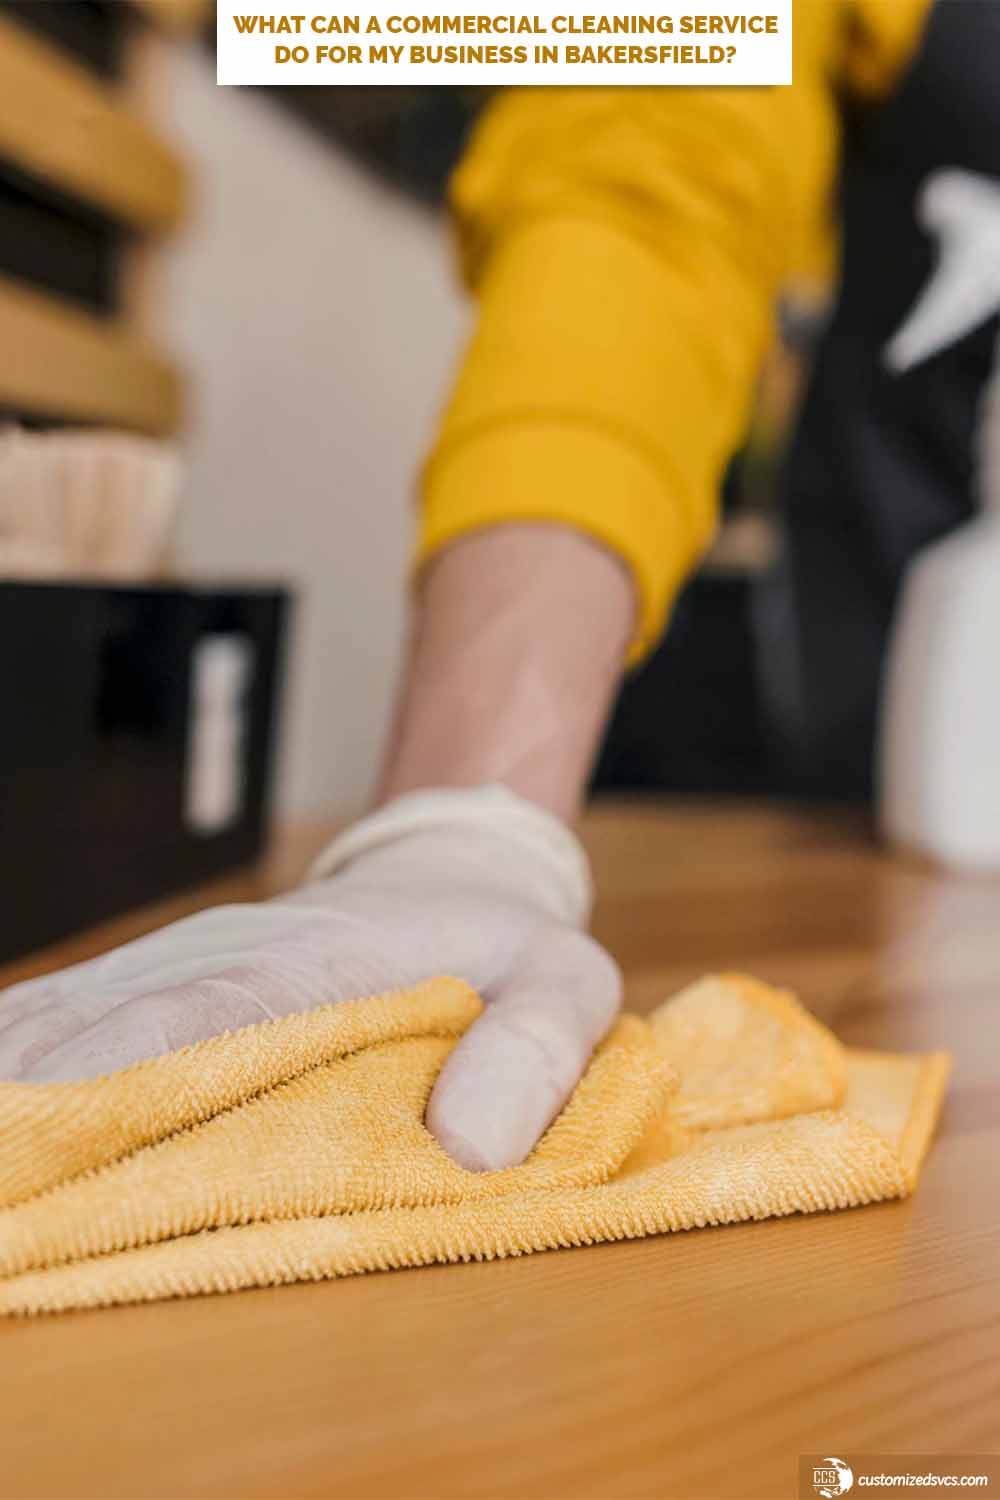 What Can A Commercial Cleaning Service Do For My Business In Bakersfield?